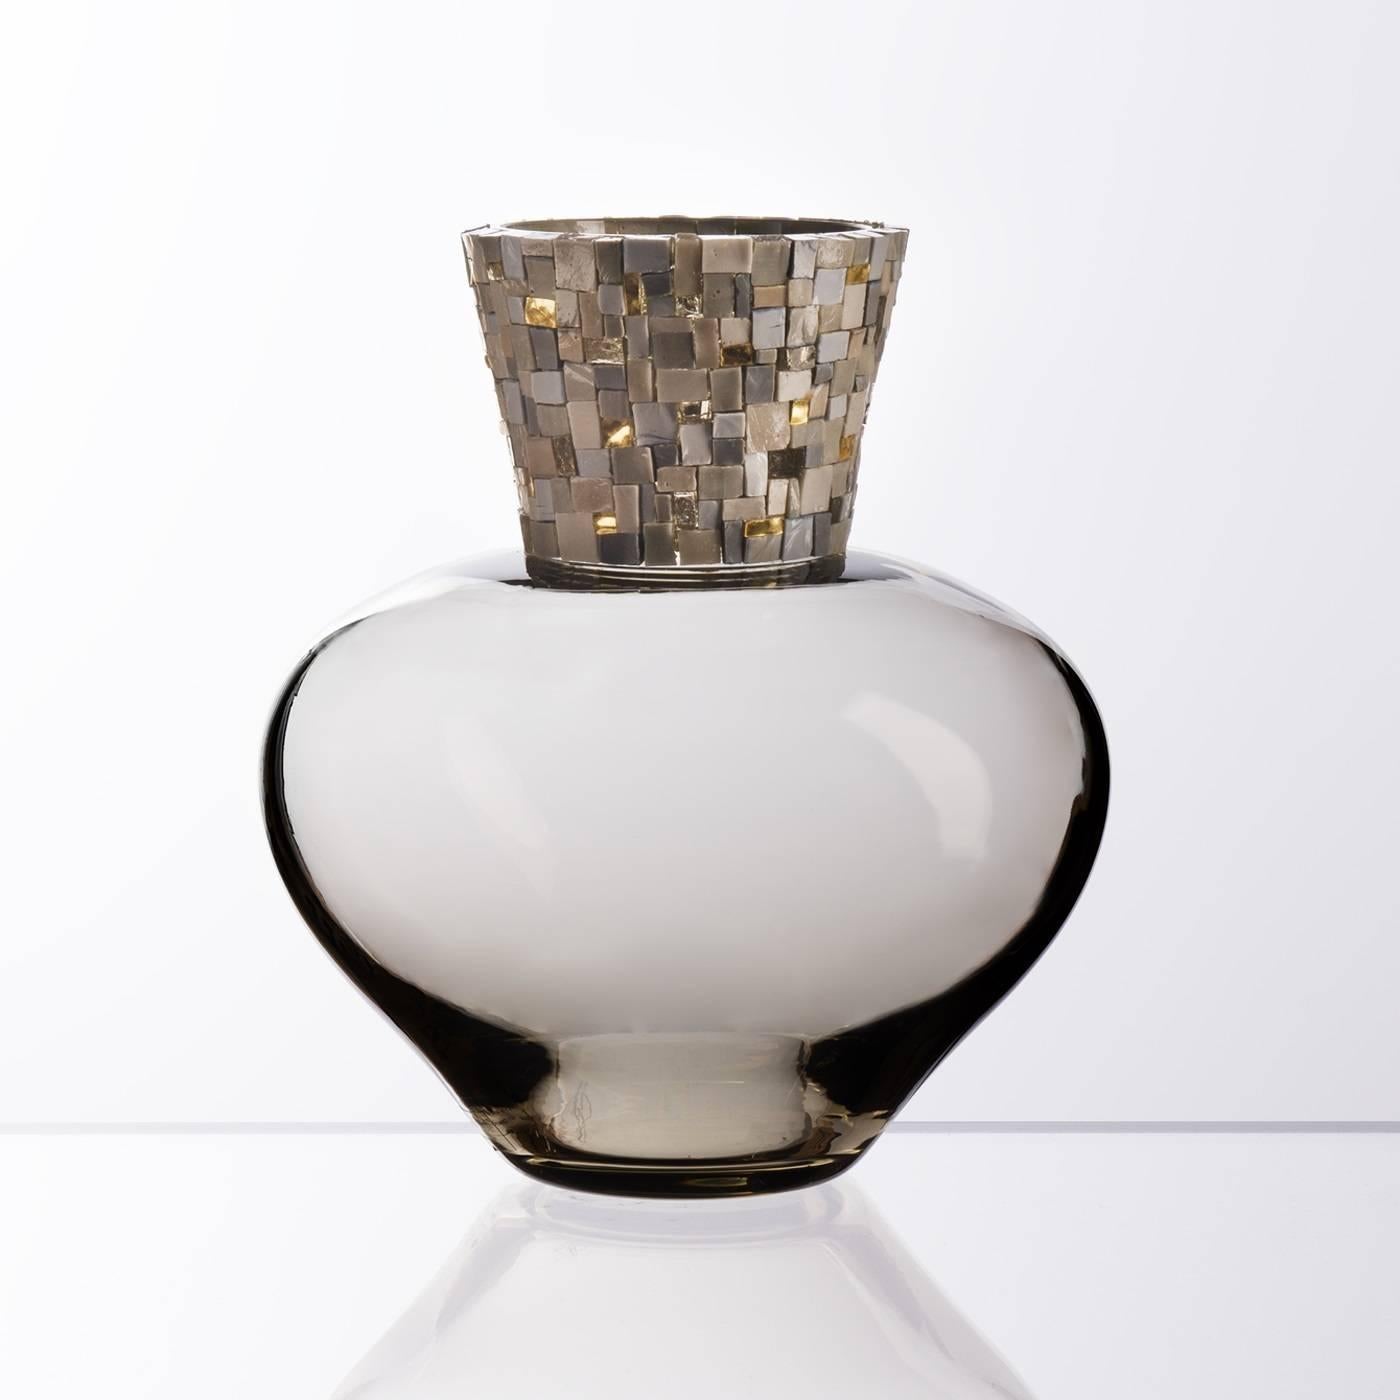 Made of Murano mouth-blown glass in a delicate gray hue, the neck of this polished vase is embellished with a striking mosaic of precious gold foil tesserae with gray opaque and transparent glass for an effect that is stylish without being